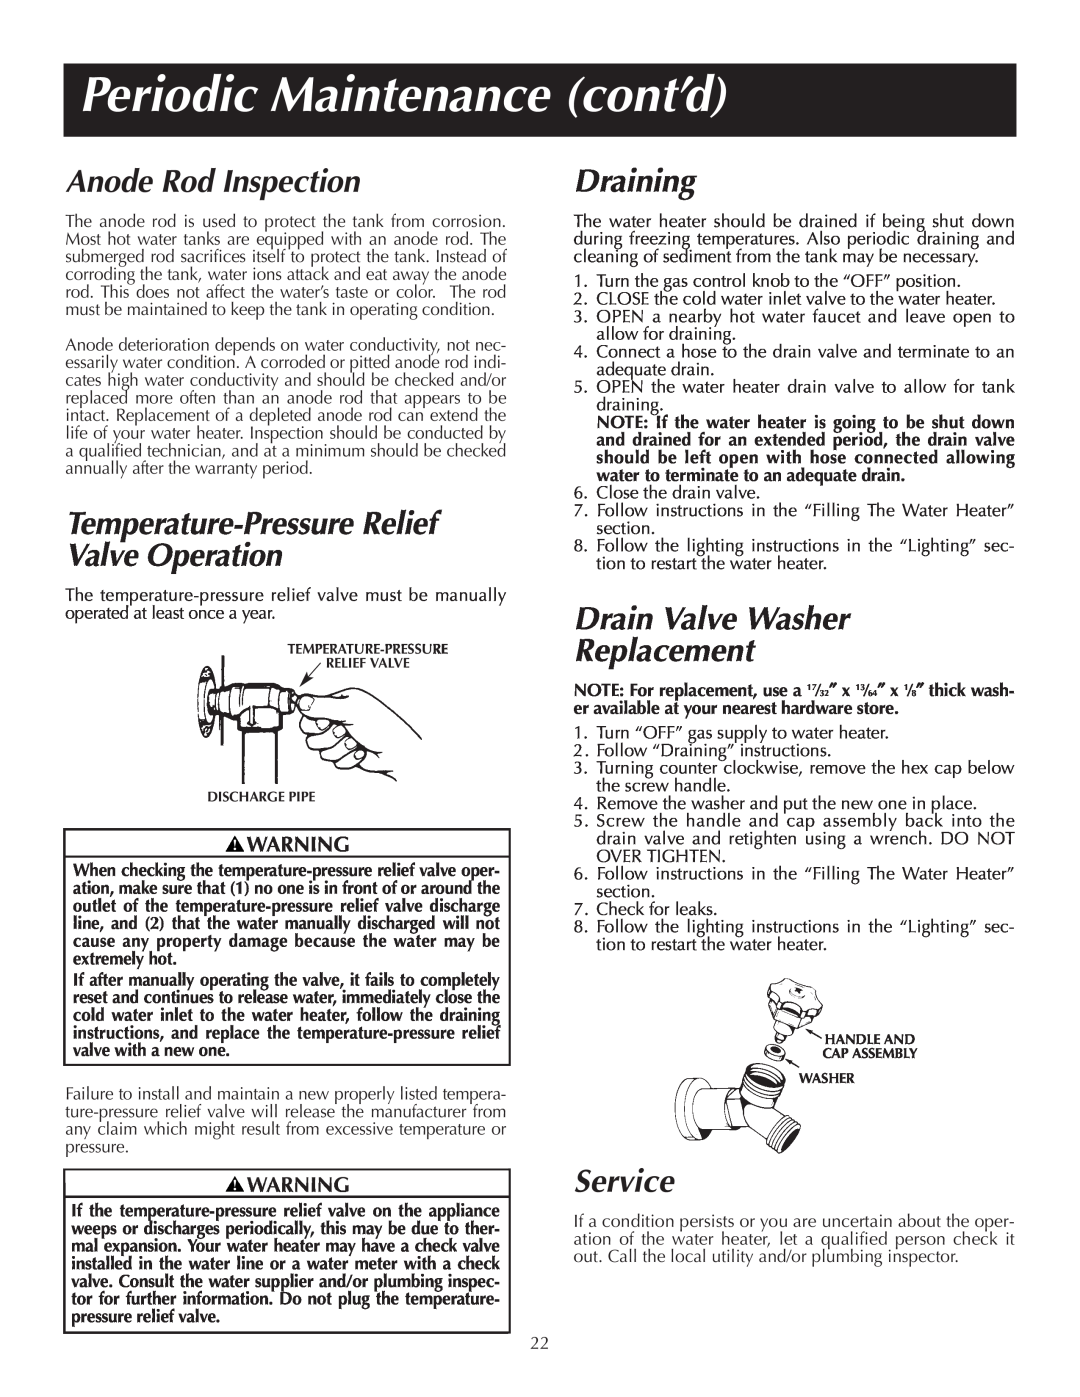 Reliance Water Heaters 184123-000 instruction manual Periodic Maintenance cont’d, Anode Rod Inspection, Draining, Service 